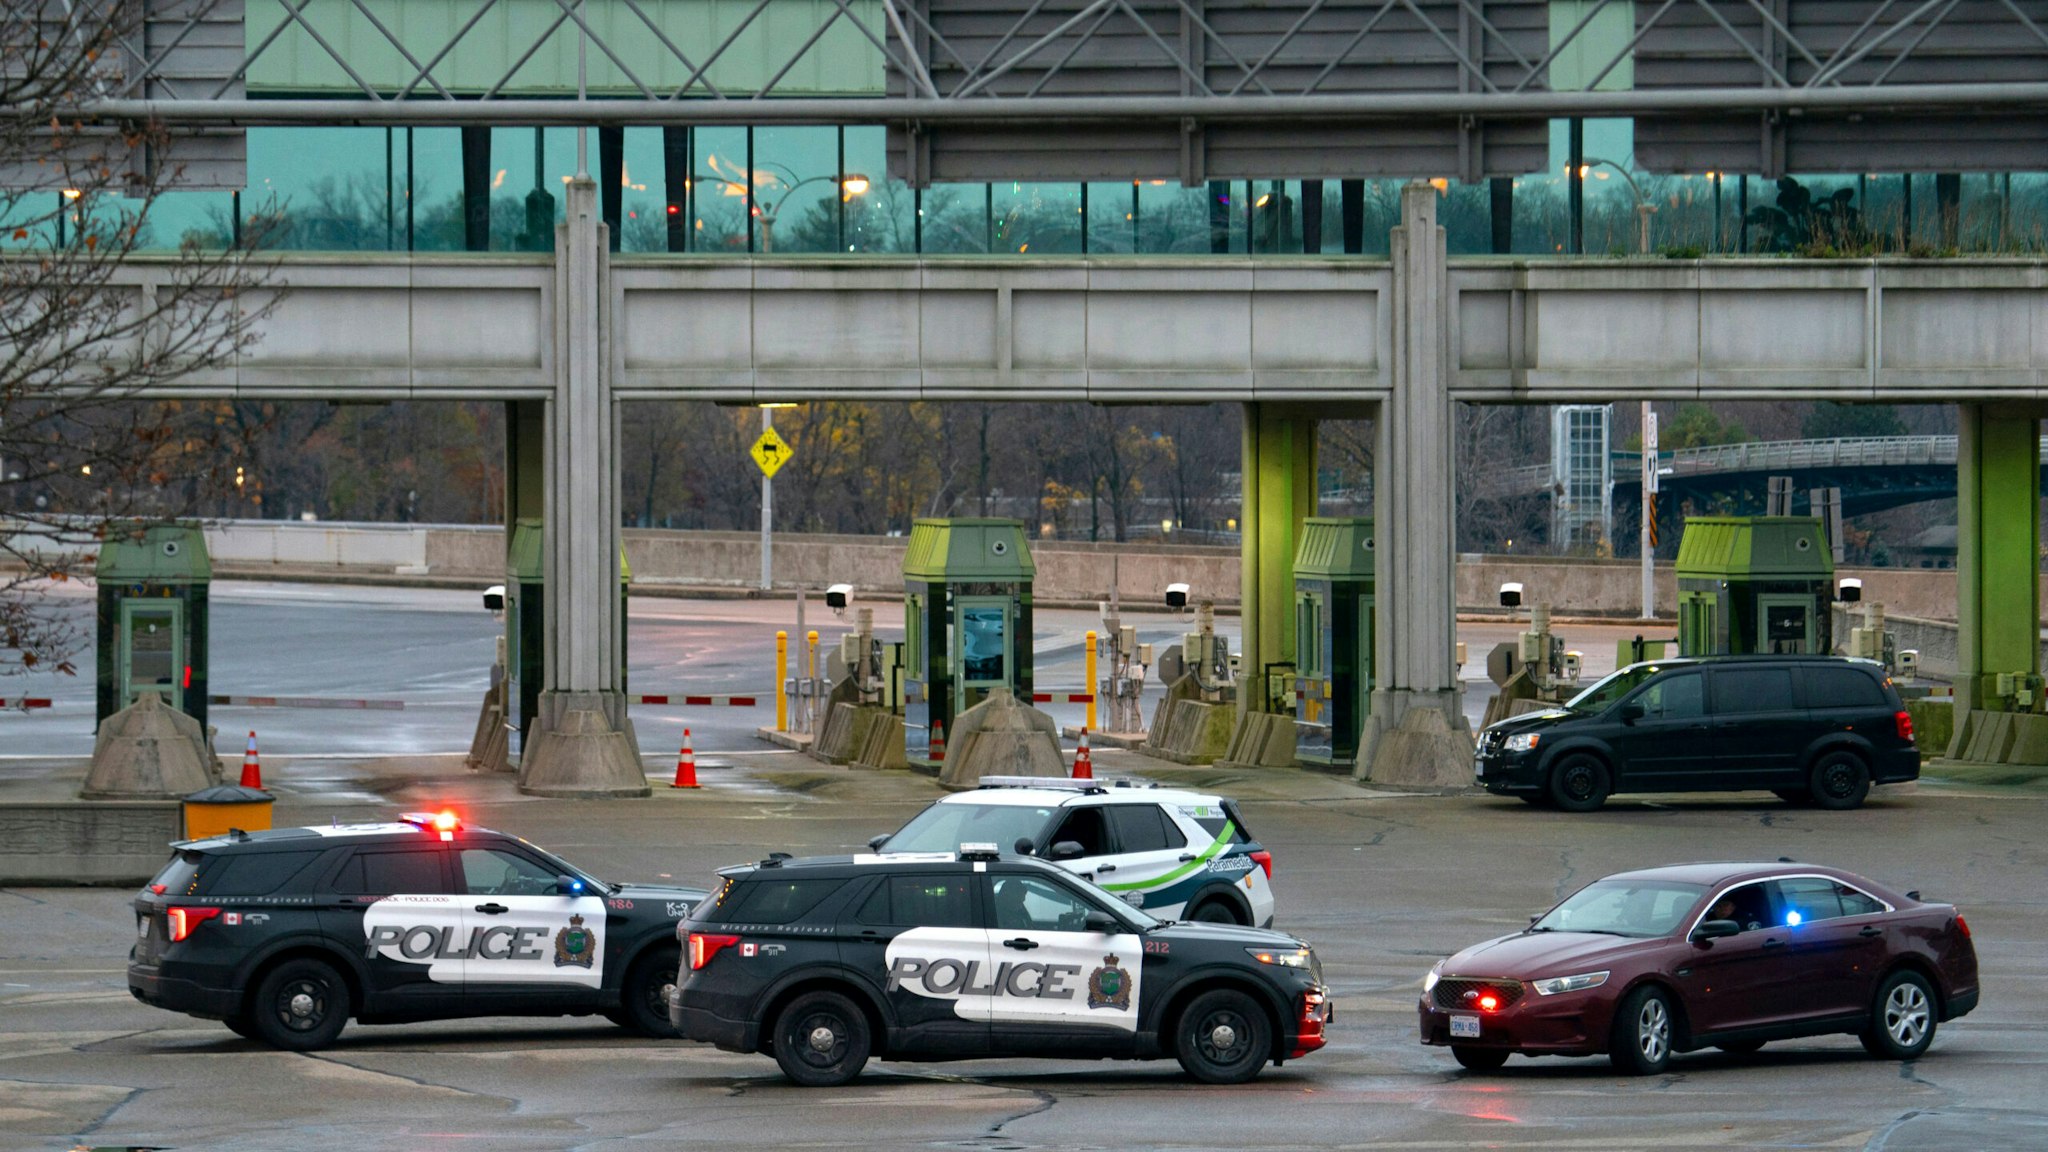 Canadian police cars are seen near the Rainbow Bridge border crossing into the US in Niagara Falls, Ontario, after a car exploded at a US-Canada checkpoint on November 22, 2023. US terrorism investigators deployed Wednesday after a car erupted into a fireball at a US-Canada checkpoint, triggering border closures on one of the busiest travel days in the American holiday calendar. Two people were killed in the blast, according to US media citing authorities, although their identi